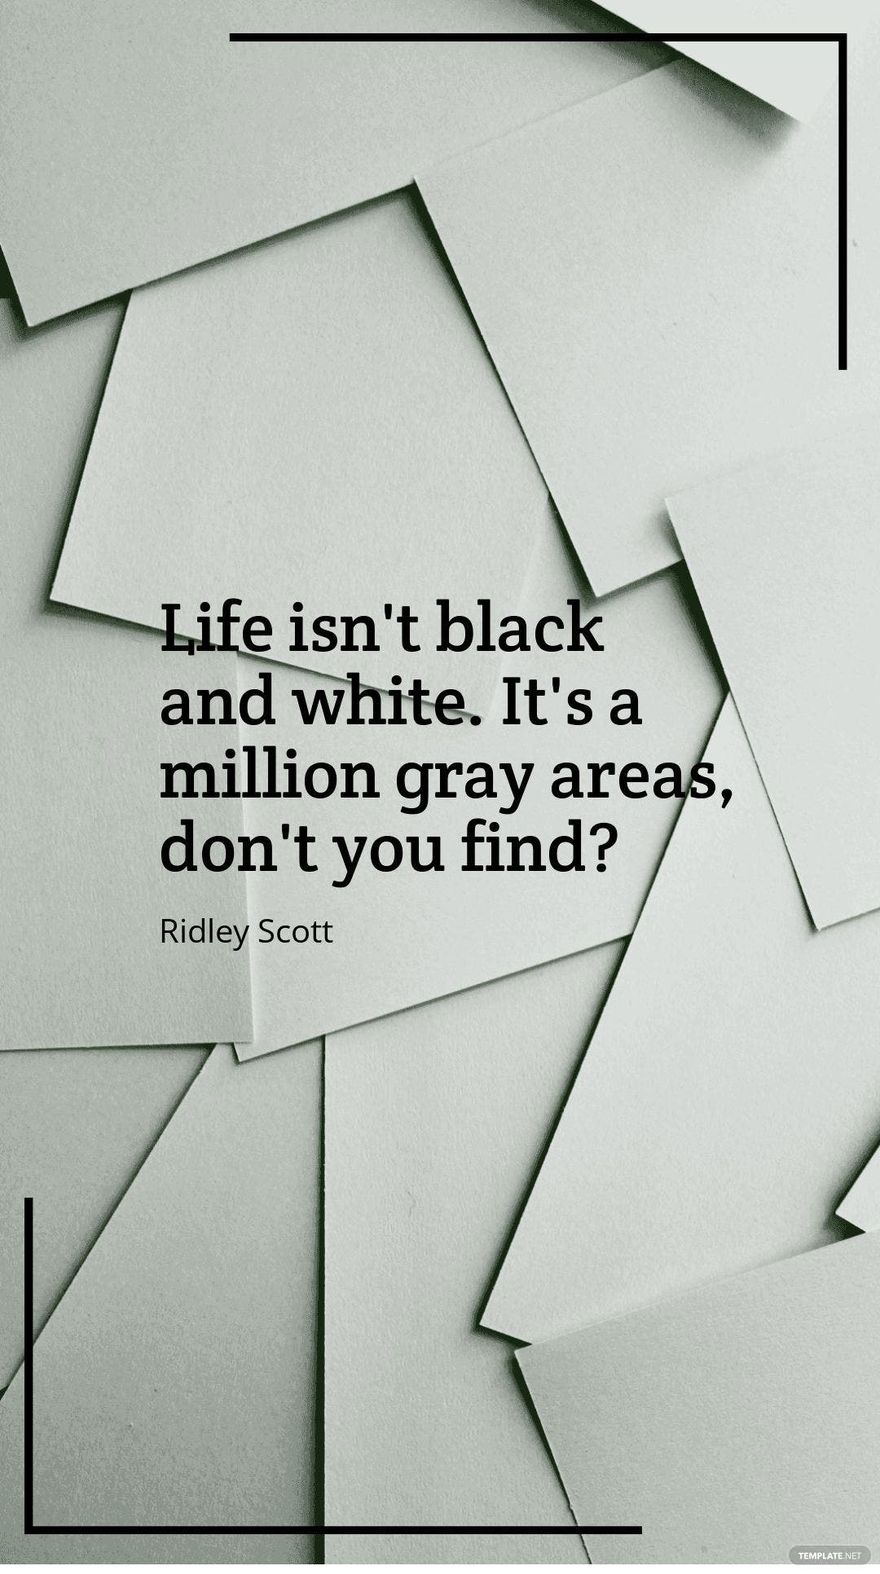 Ridley Scott - Life isn't black and white. It's a million gray areas, don't you find?